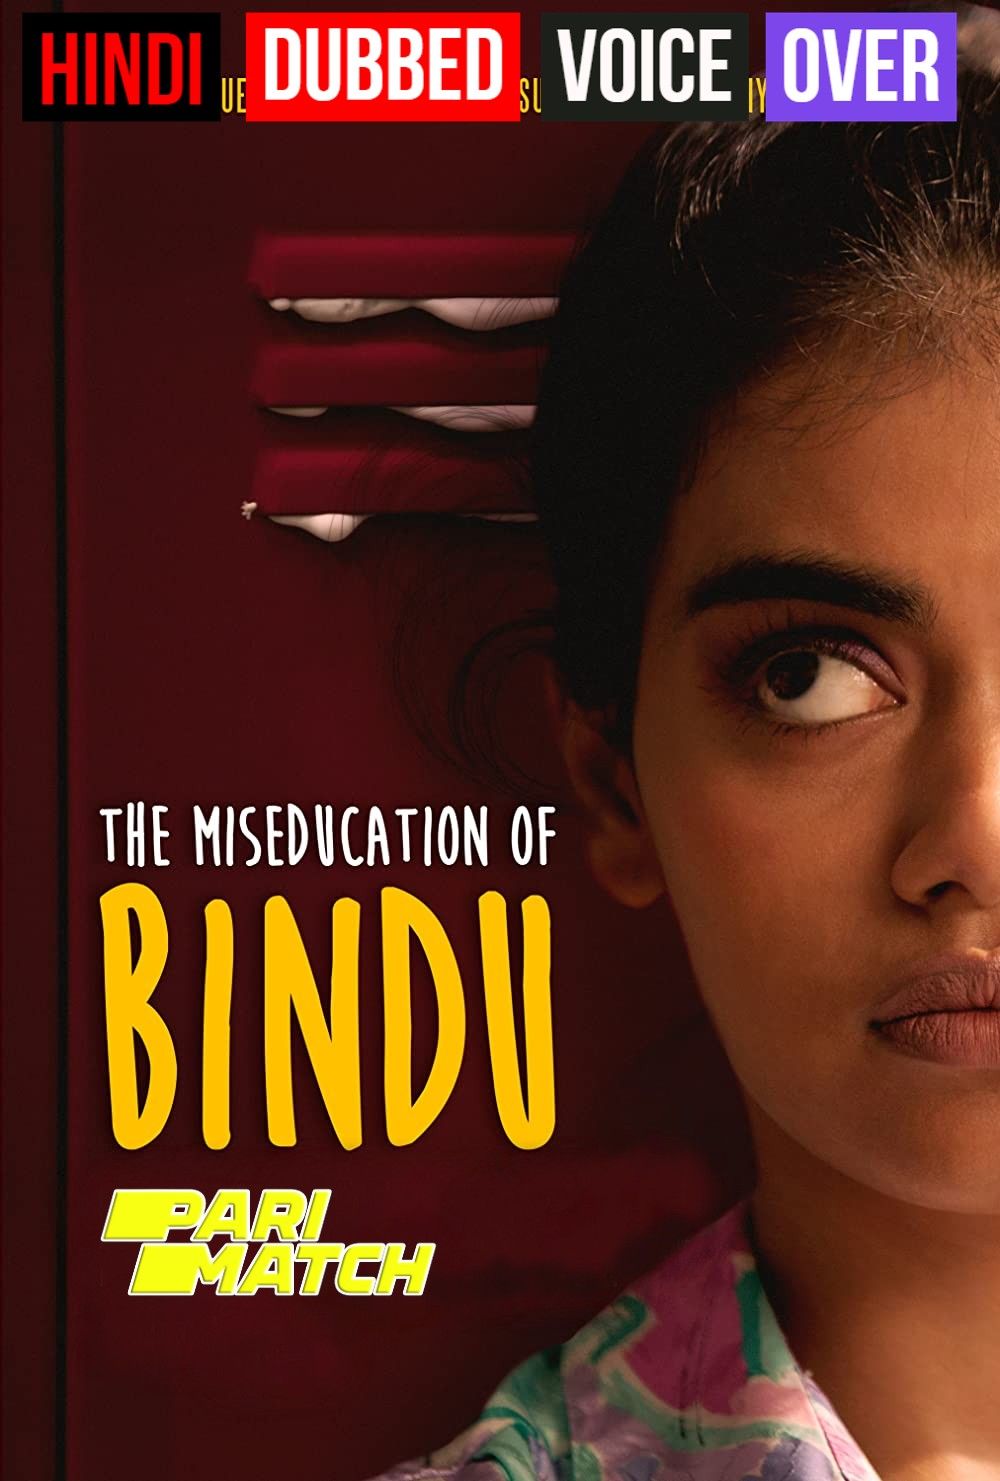 The Miseducation of Bindu (2020) Hindi (Voice Over) Dubbed WEBRip download full movie